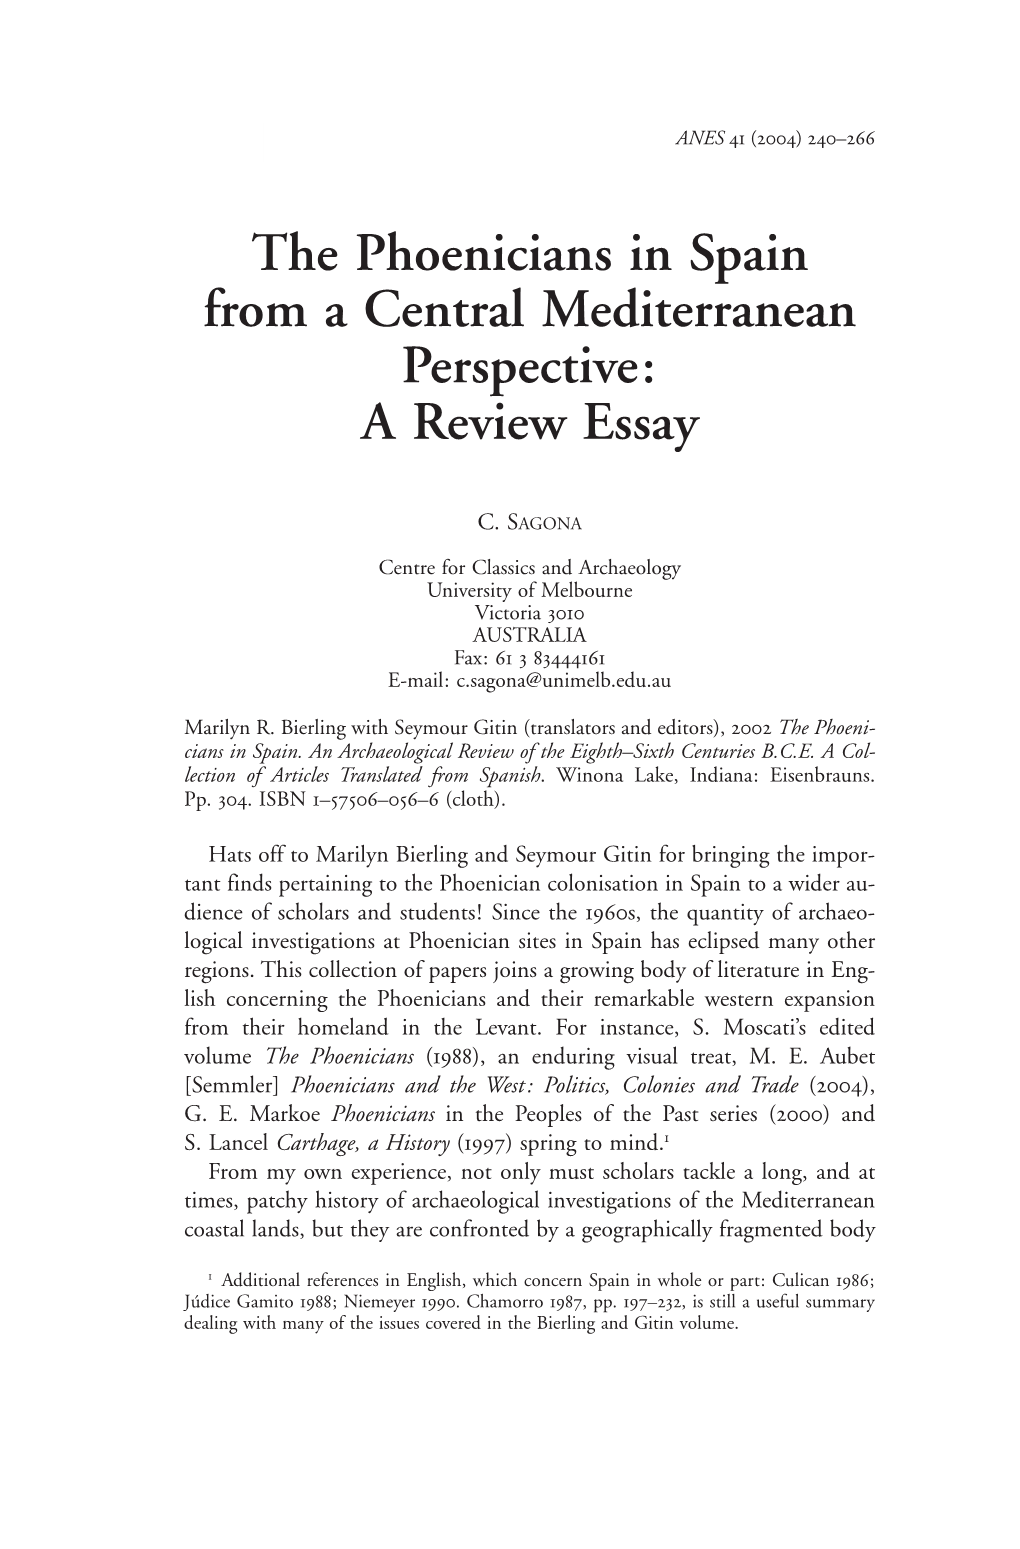 The Phoenicians in Spain from a Central Mediterranean Perspective: a Review Essay